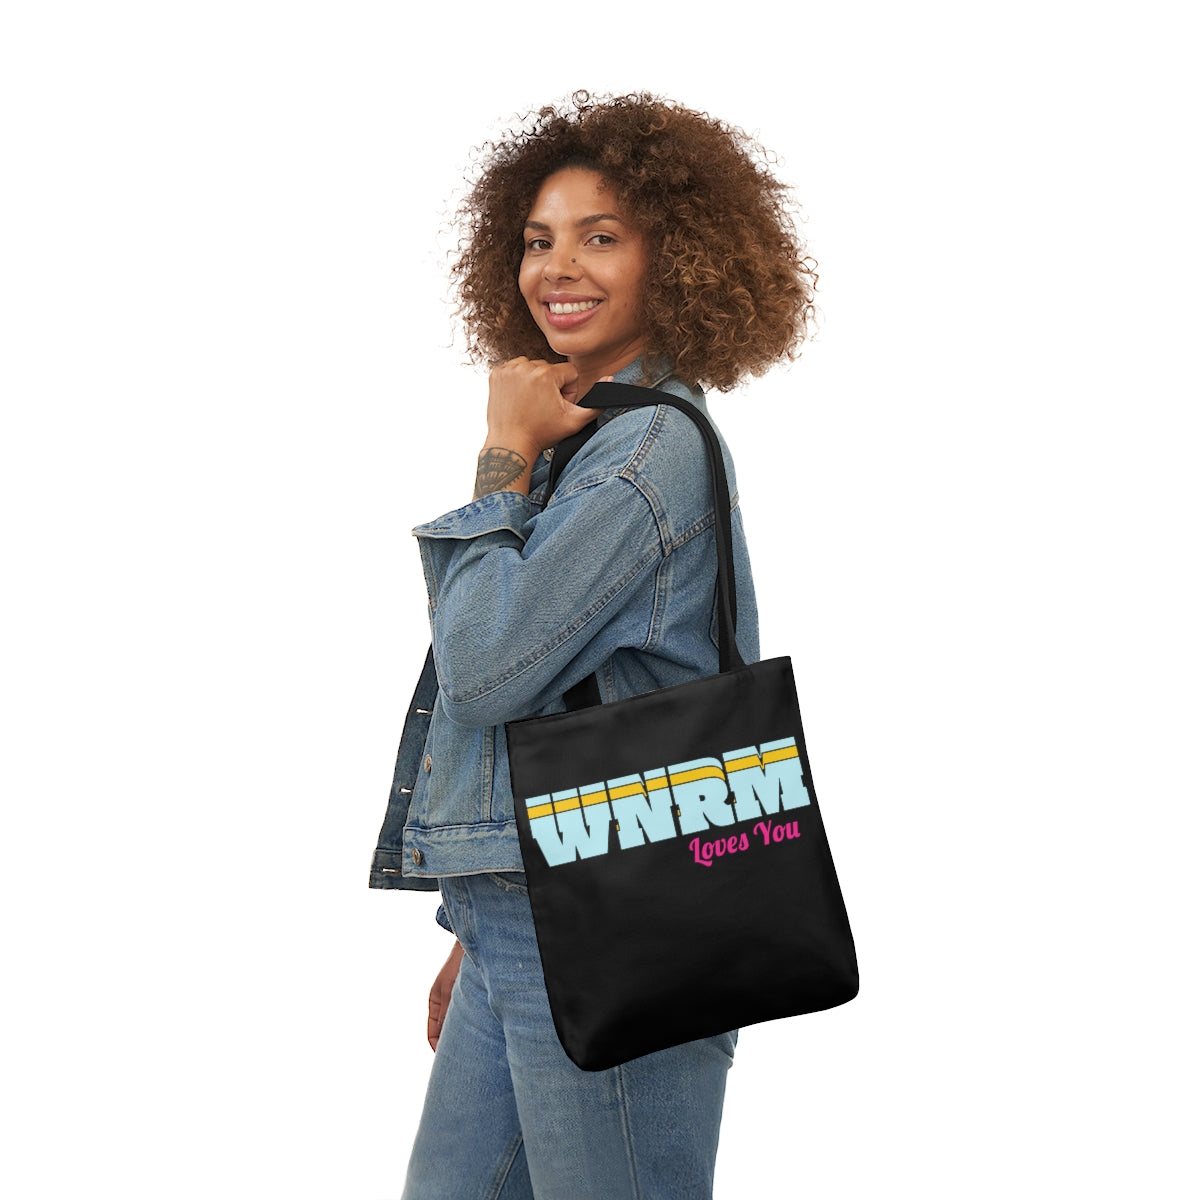 Cool girl holding a WNRM Loves You Polyester Canvas Tote Bag, with jeans on on a white background